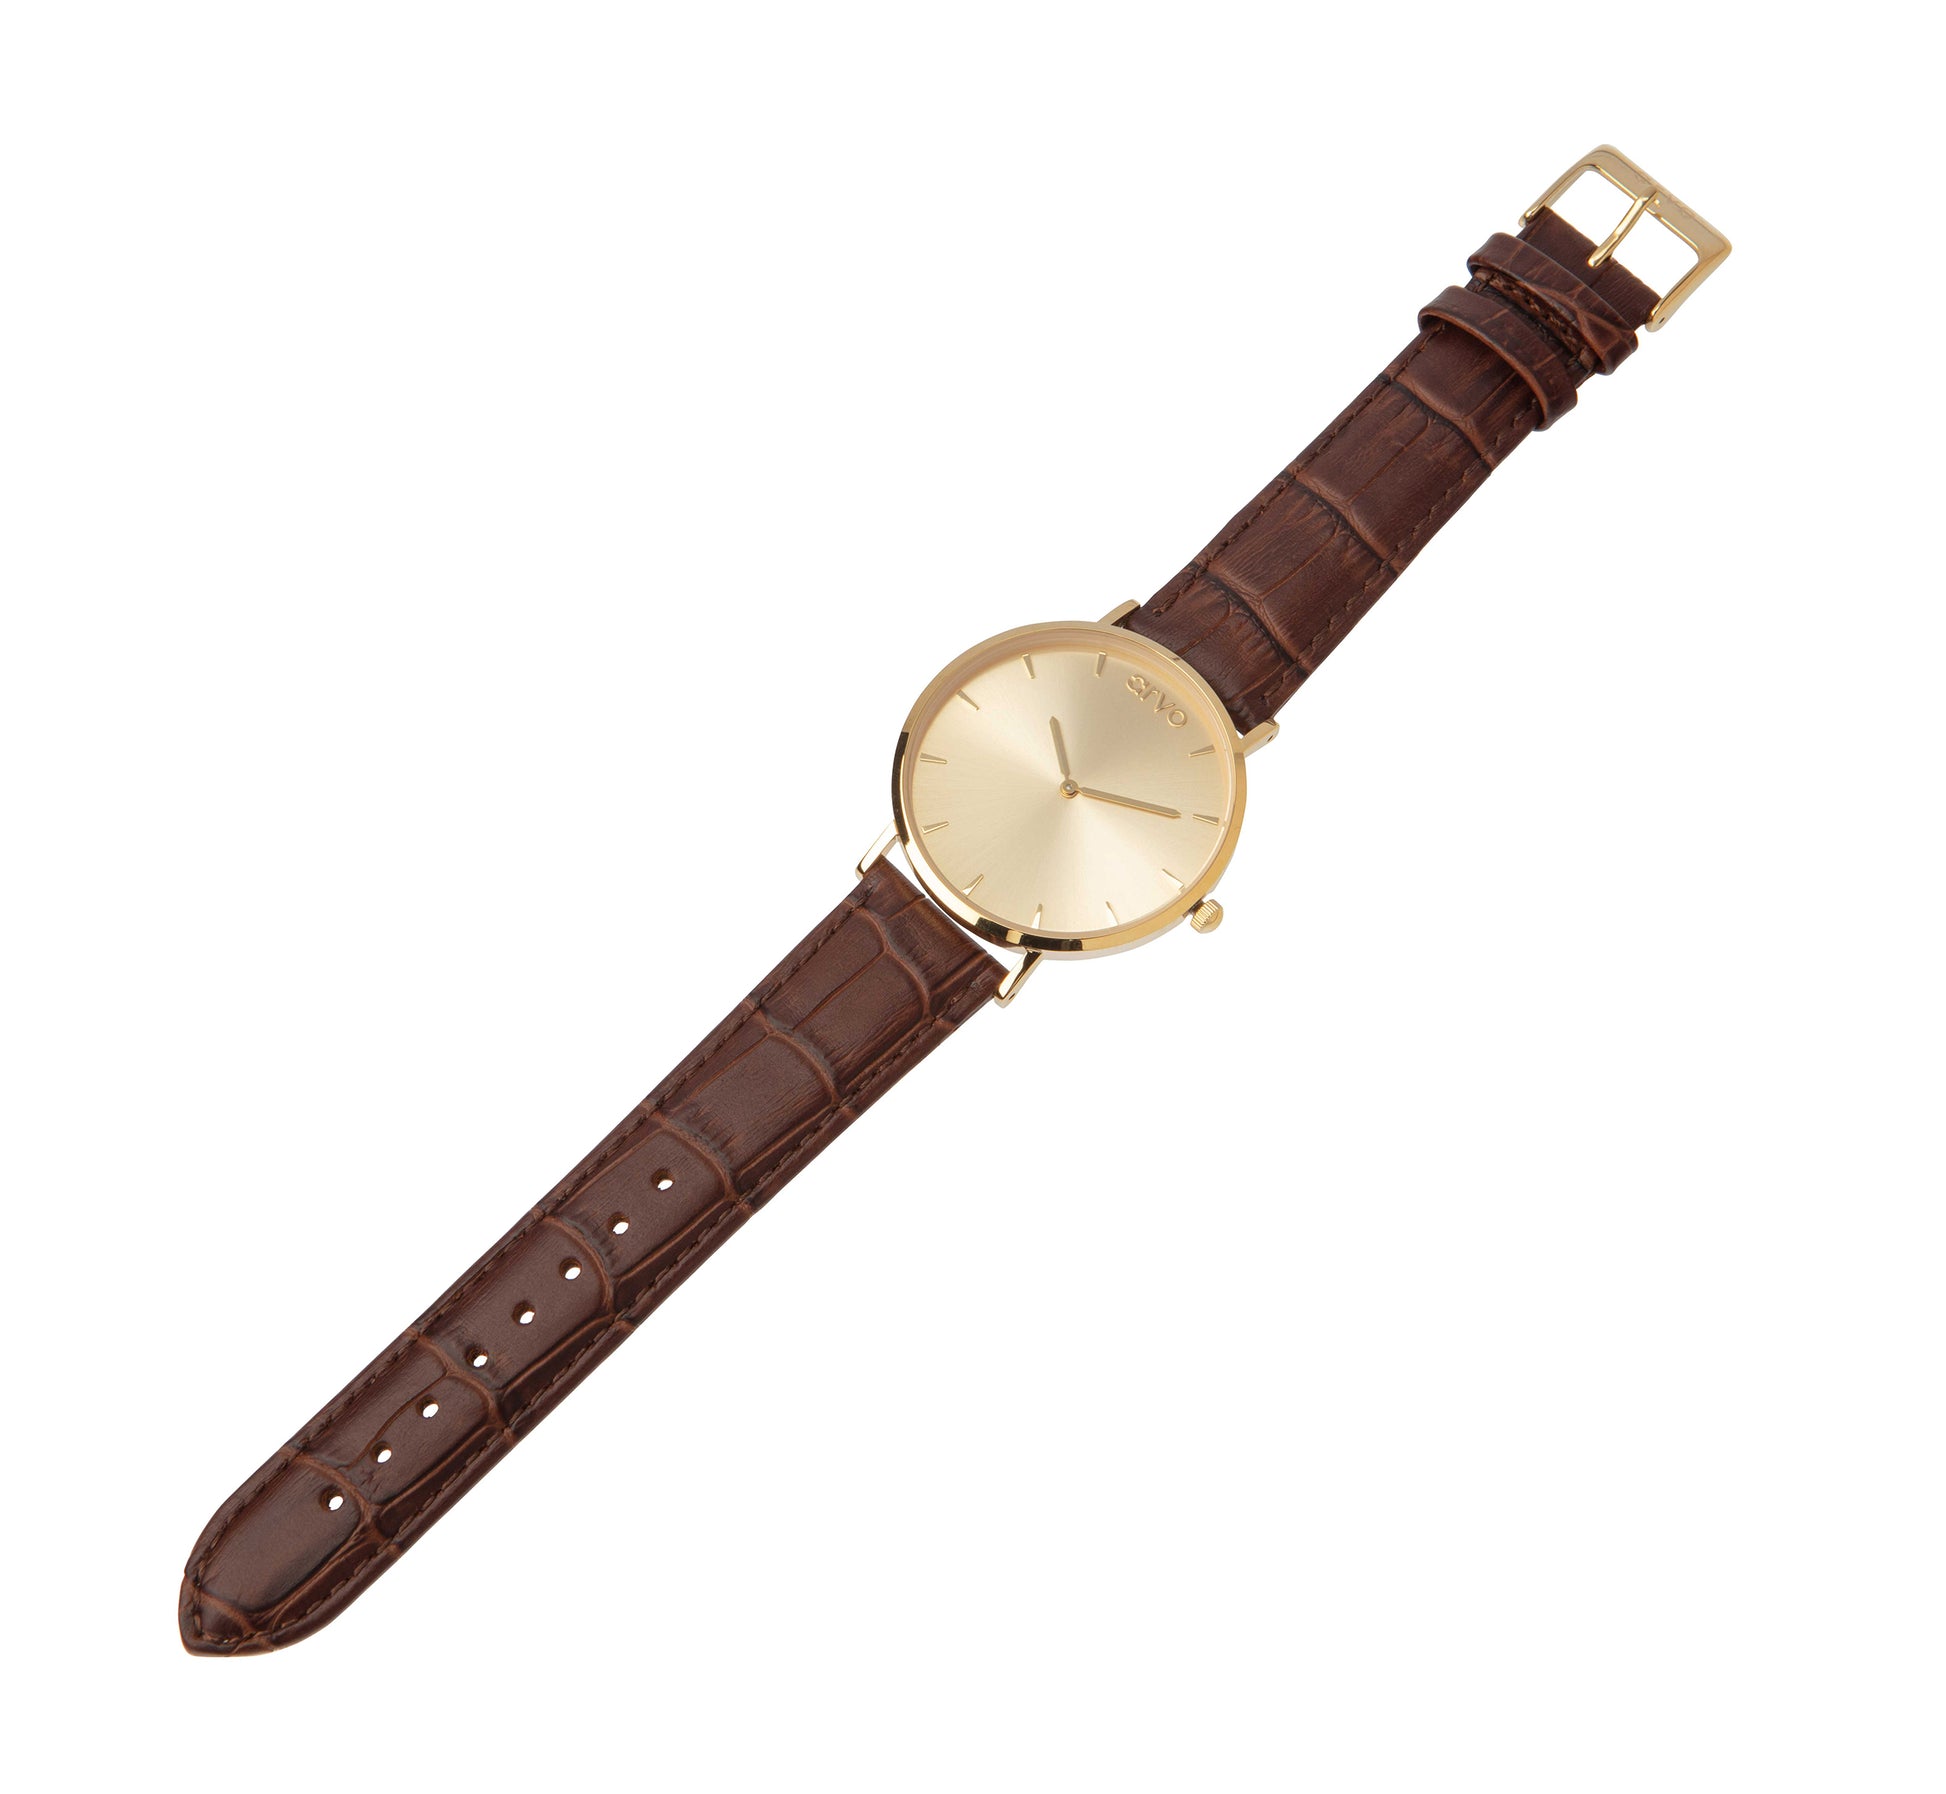 The Leonarvo Gold Watch for men with alligator print genuine leather band